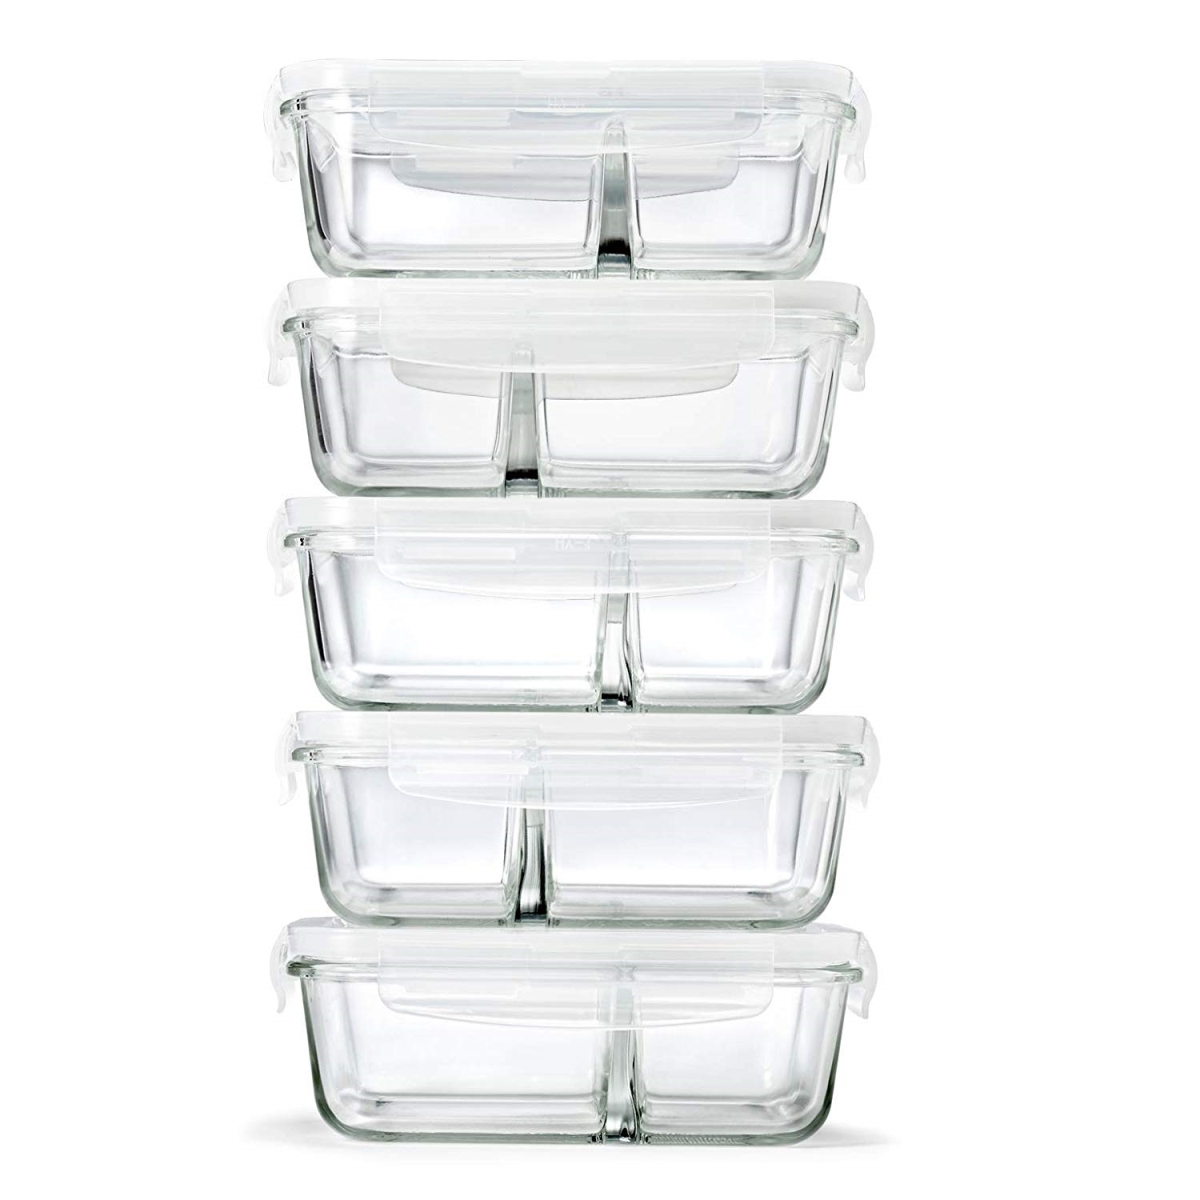 871gff 27.05 Oz Dual Chamber Divided Glass Containers, Set Of 5